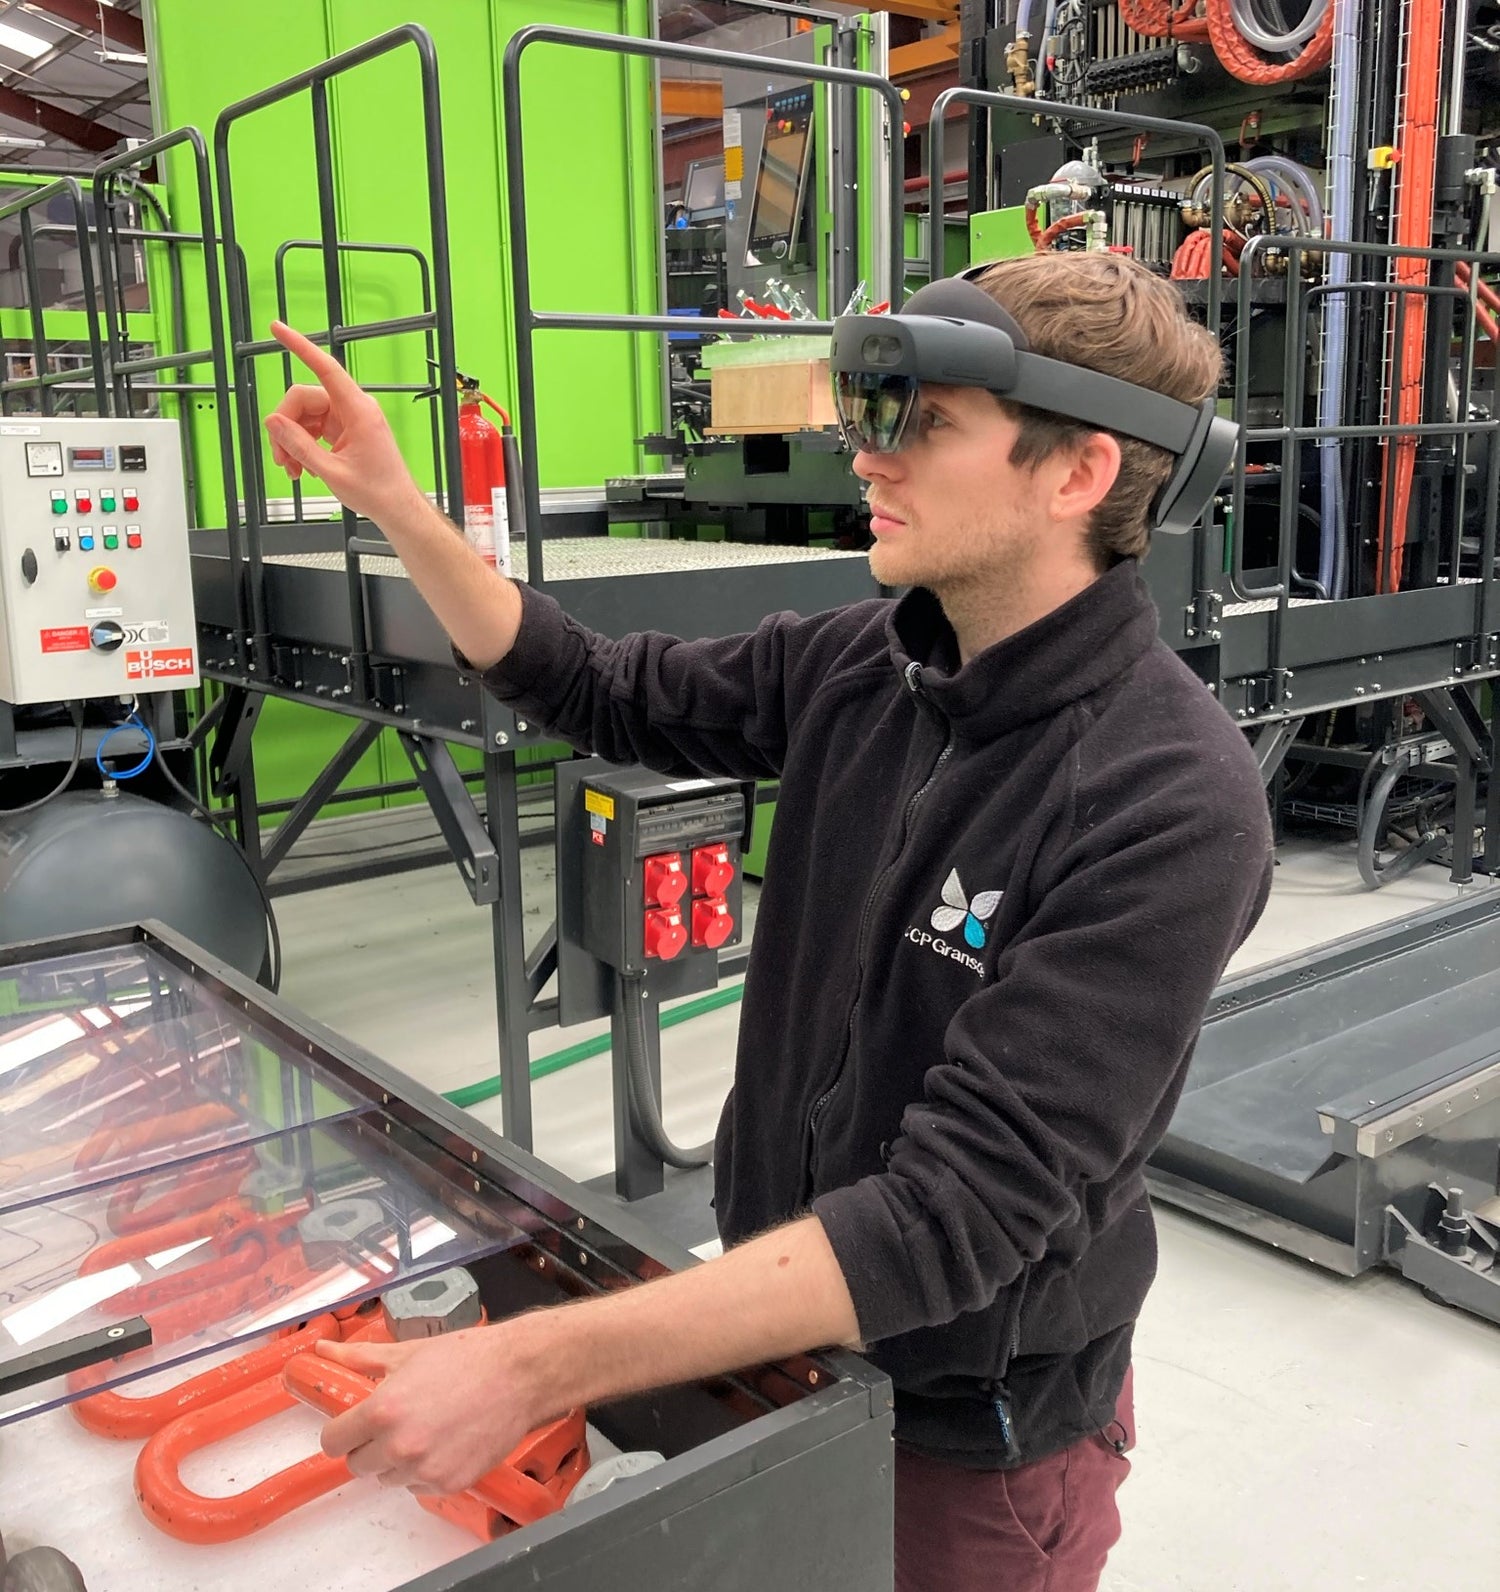 An employee at CCP Gransden working on the shop floor touches a virtual button as he carries out a production process step guided by a microsoft hololens augmented reality headset